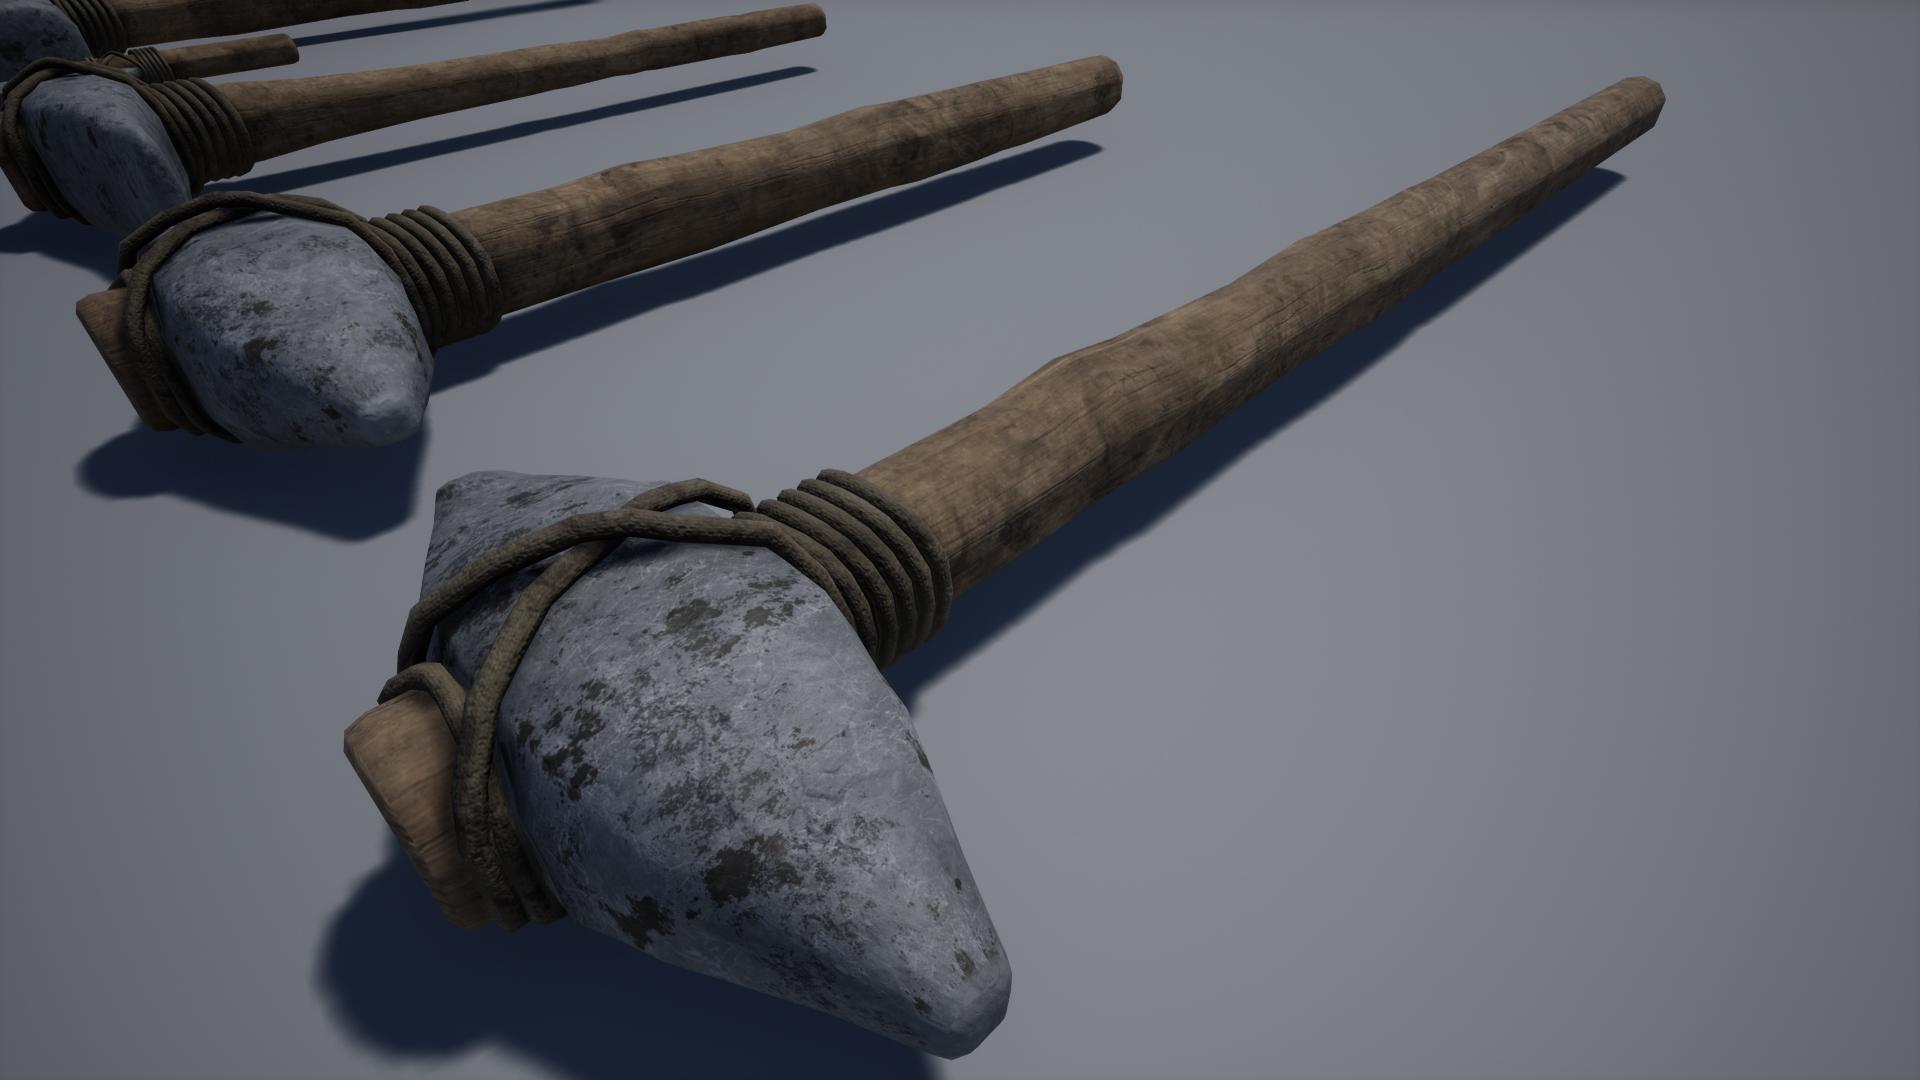 Ancient Tools Pack 2 by SvitchMark in Props - UE4 Marketplace